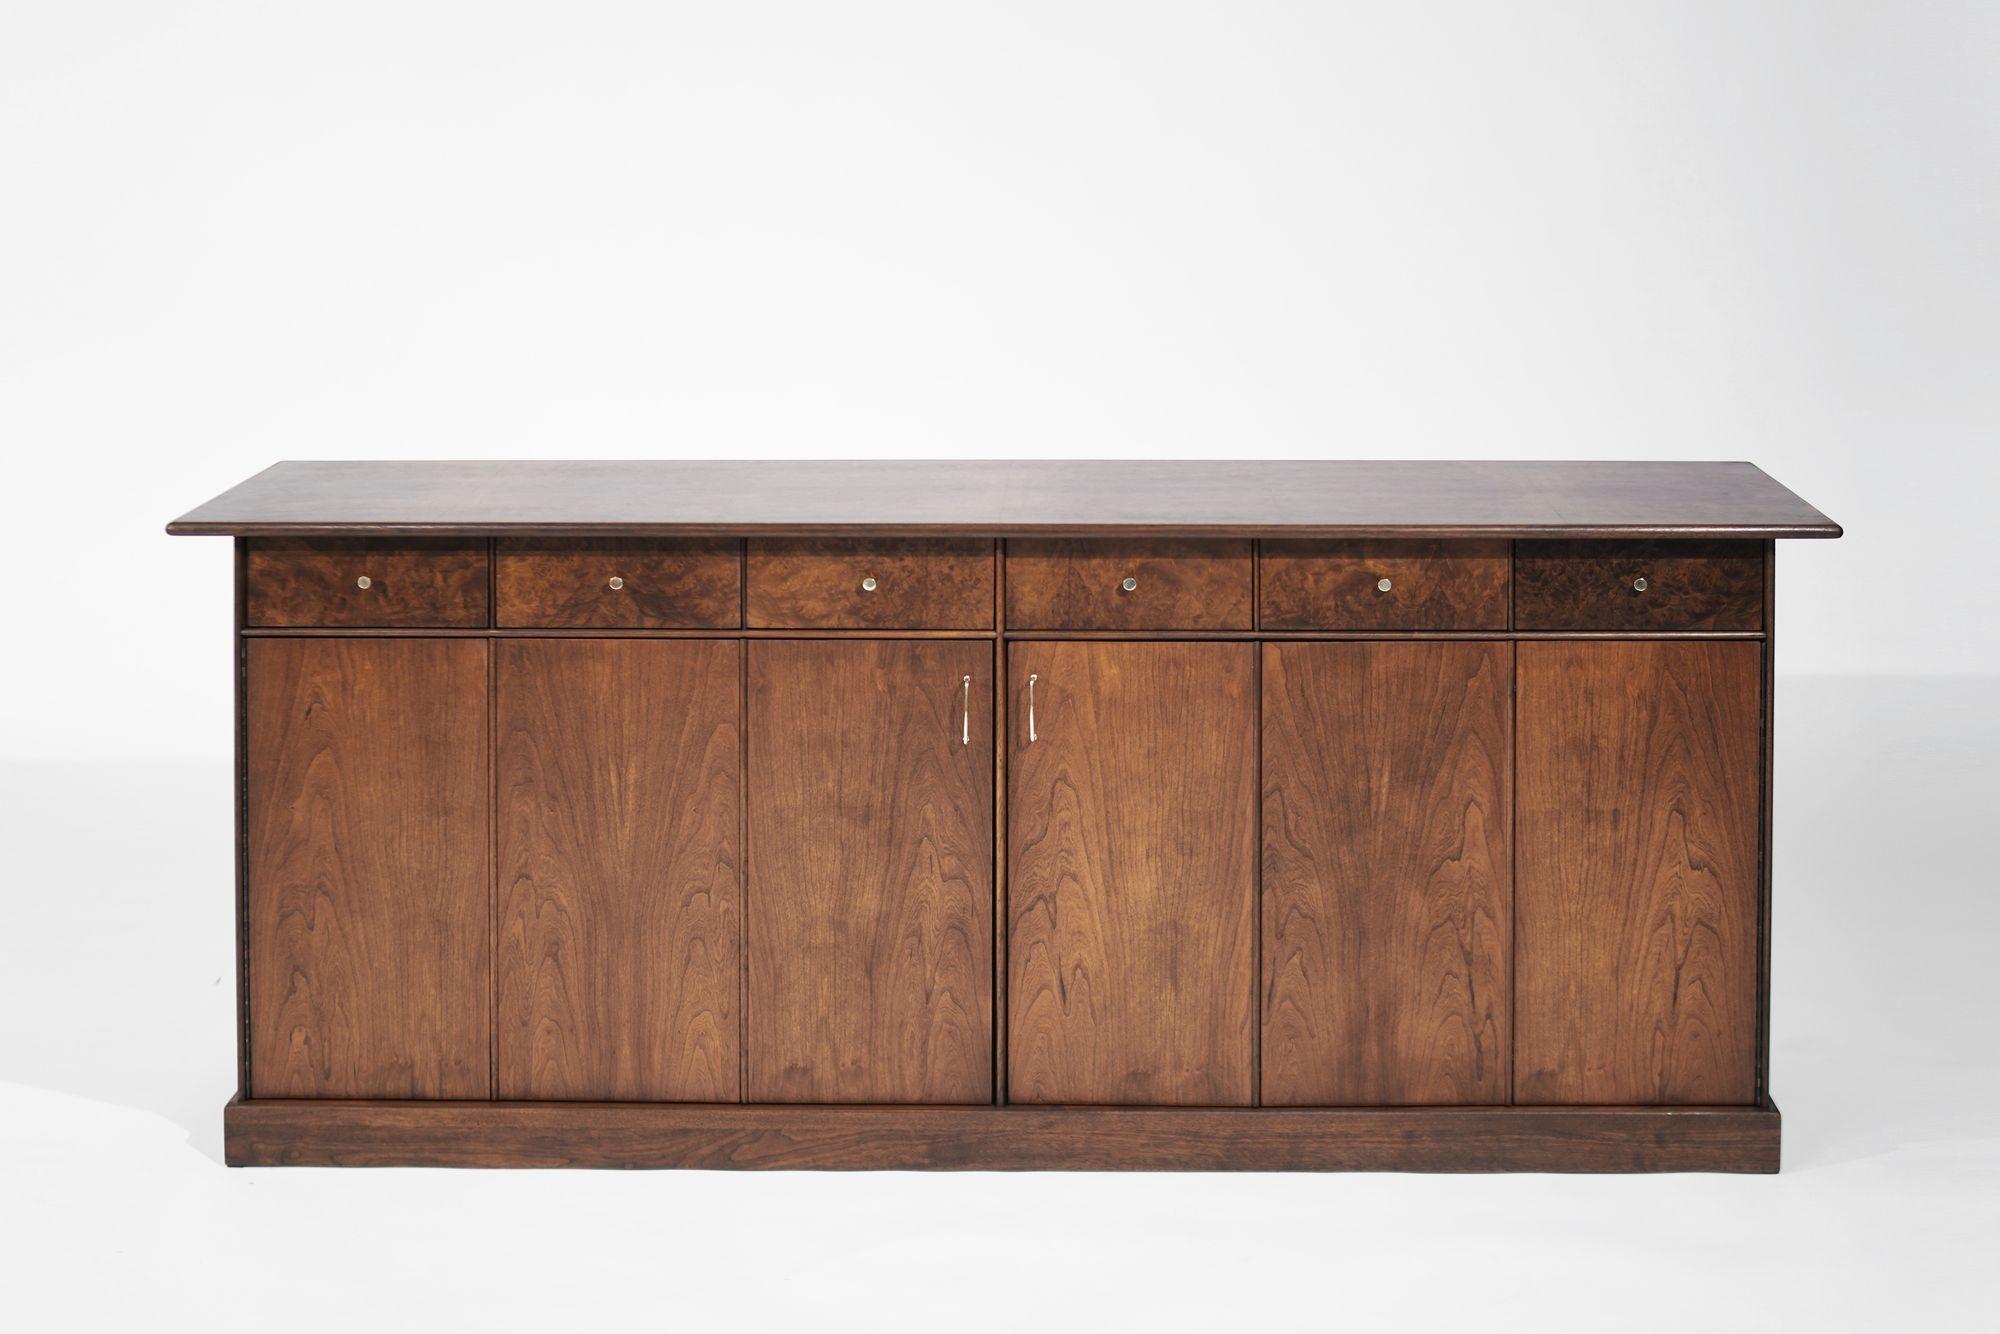 A rare gem from the Mid-Century Modern era – a captivating, fully restored credenza or dresser meticulously crafted by Milo Baughman for his esteemed Country Villa collection for Directional. This exquisite dresser showcases the unparalleled beauty